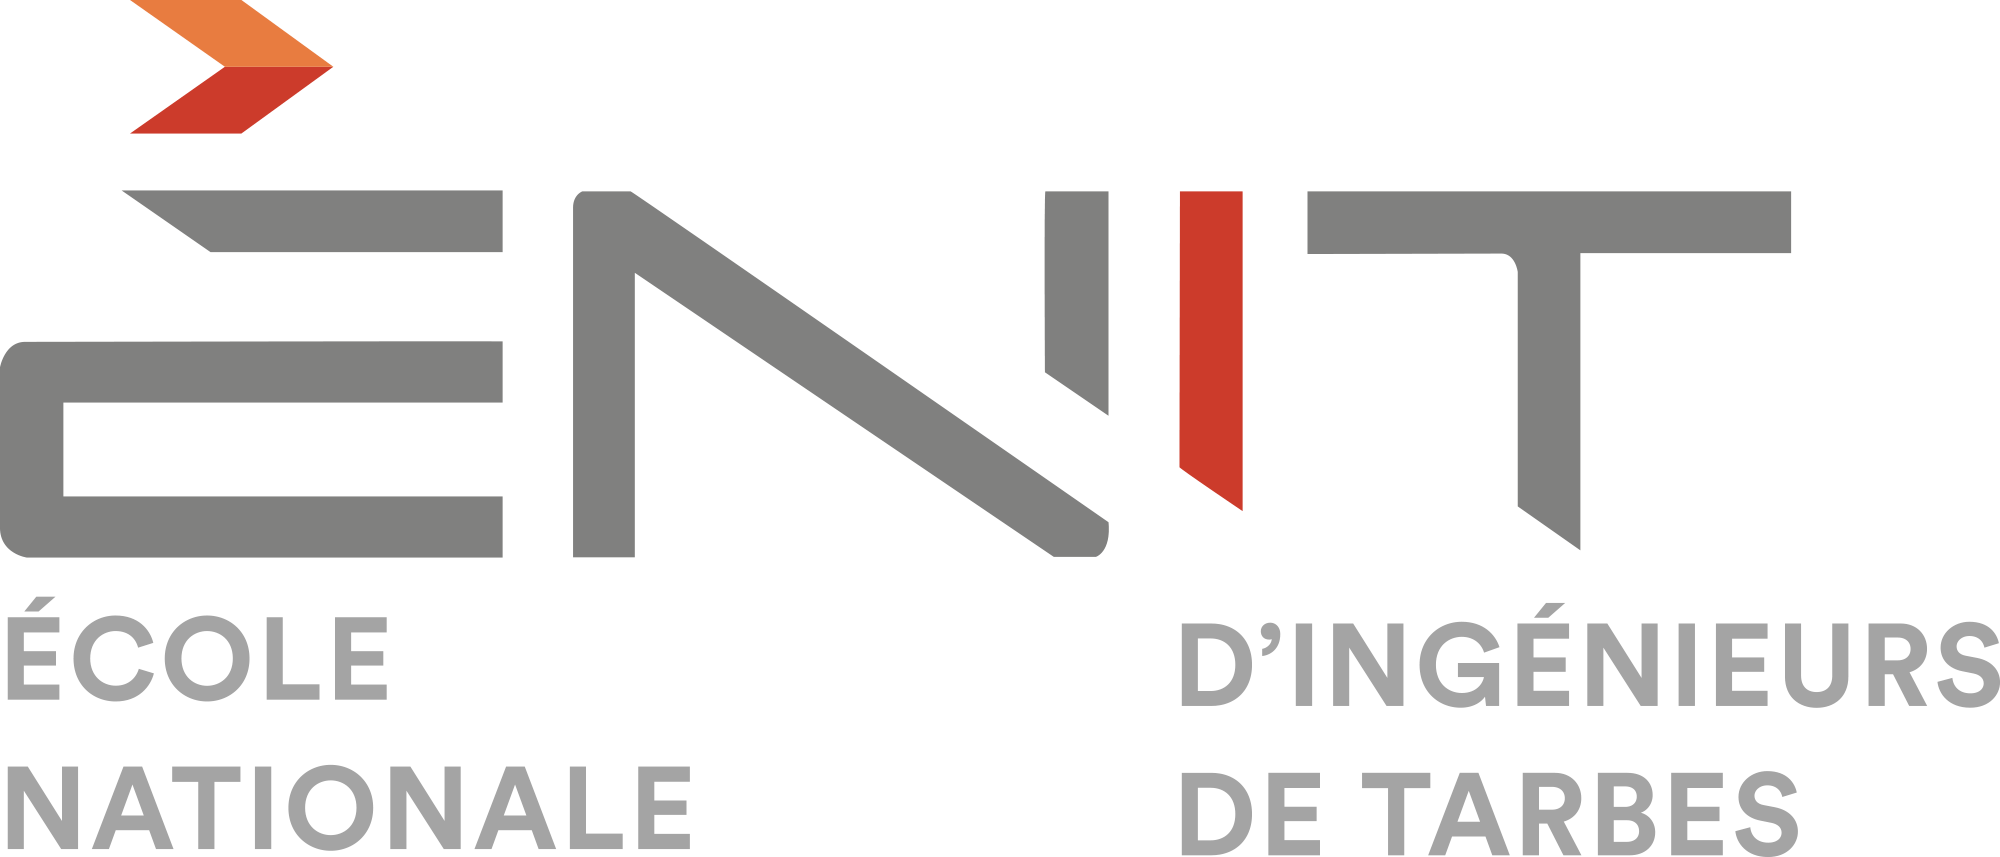 Deadline Extension) National School Of Engineers Of Tarbes – Enit, European Project Semester Spring 2023 - Its Global Engagement